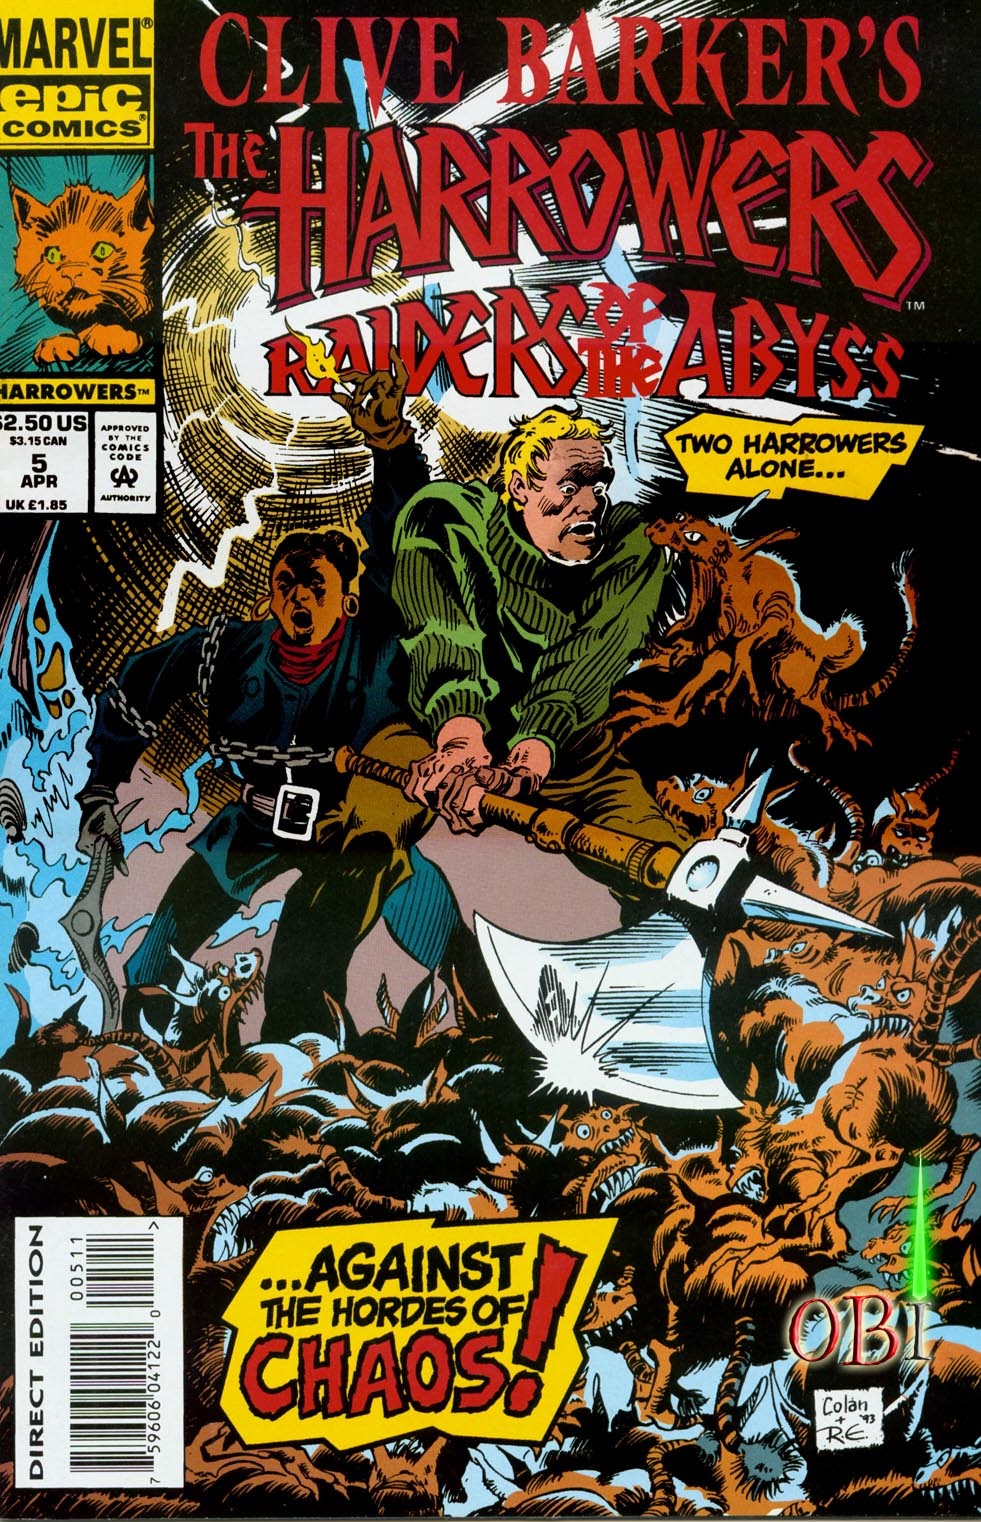 Read online Clive Barker's The Harrowers comic -  Issue #5 - 1